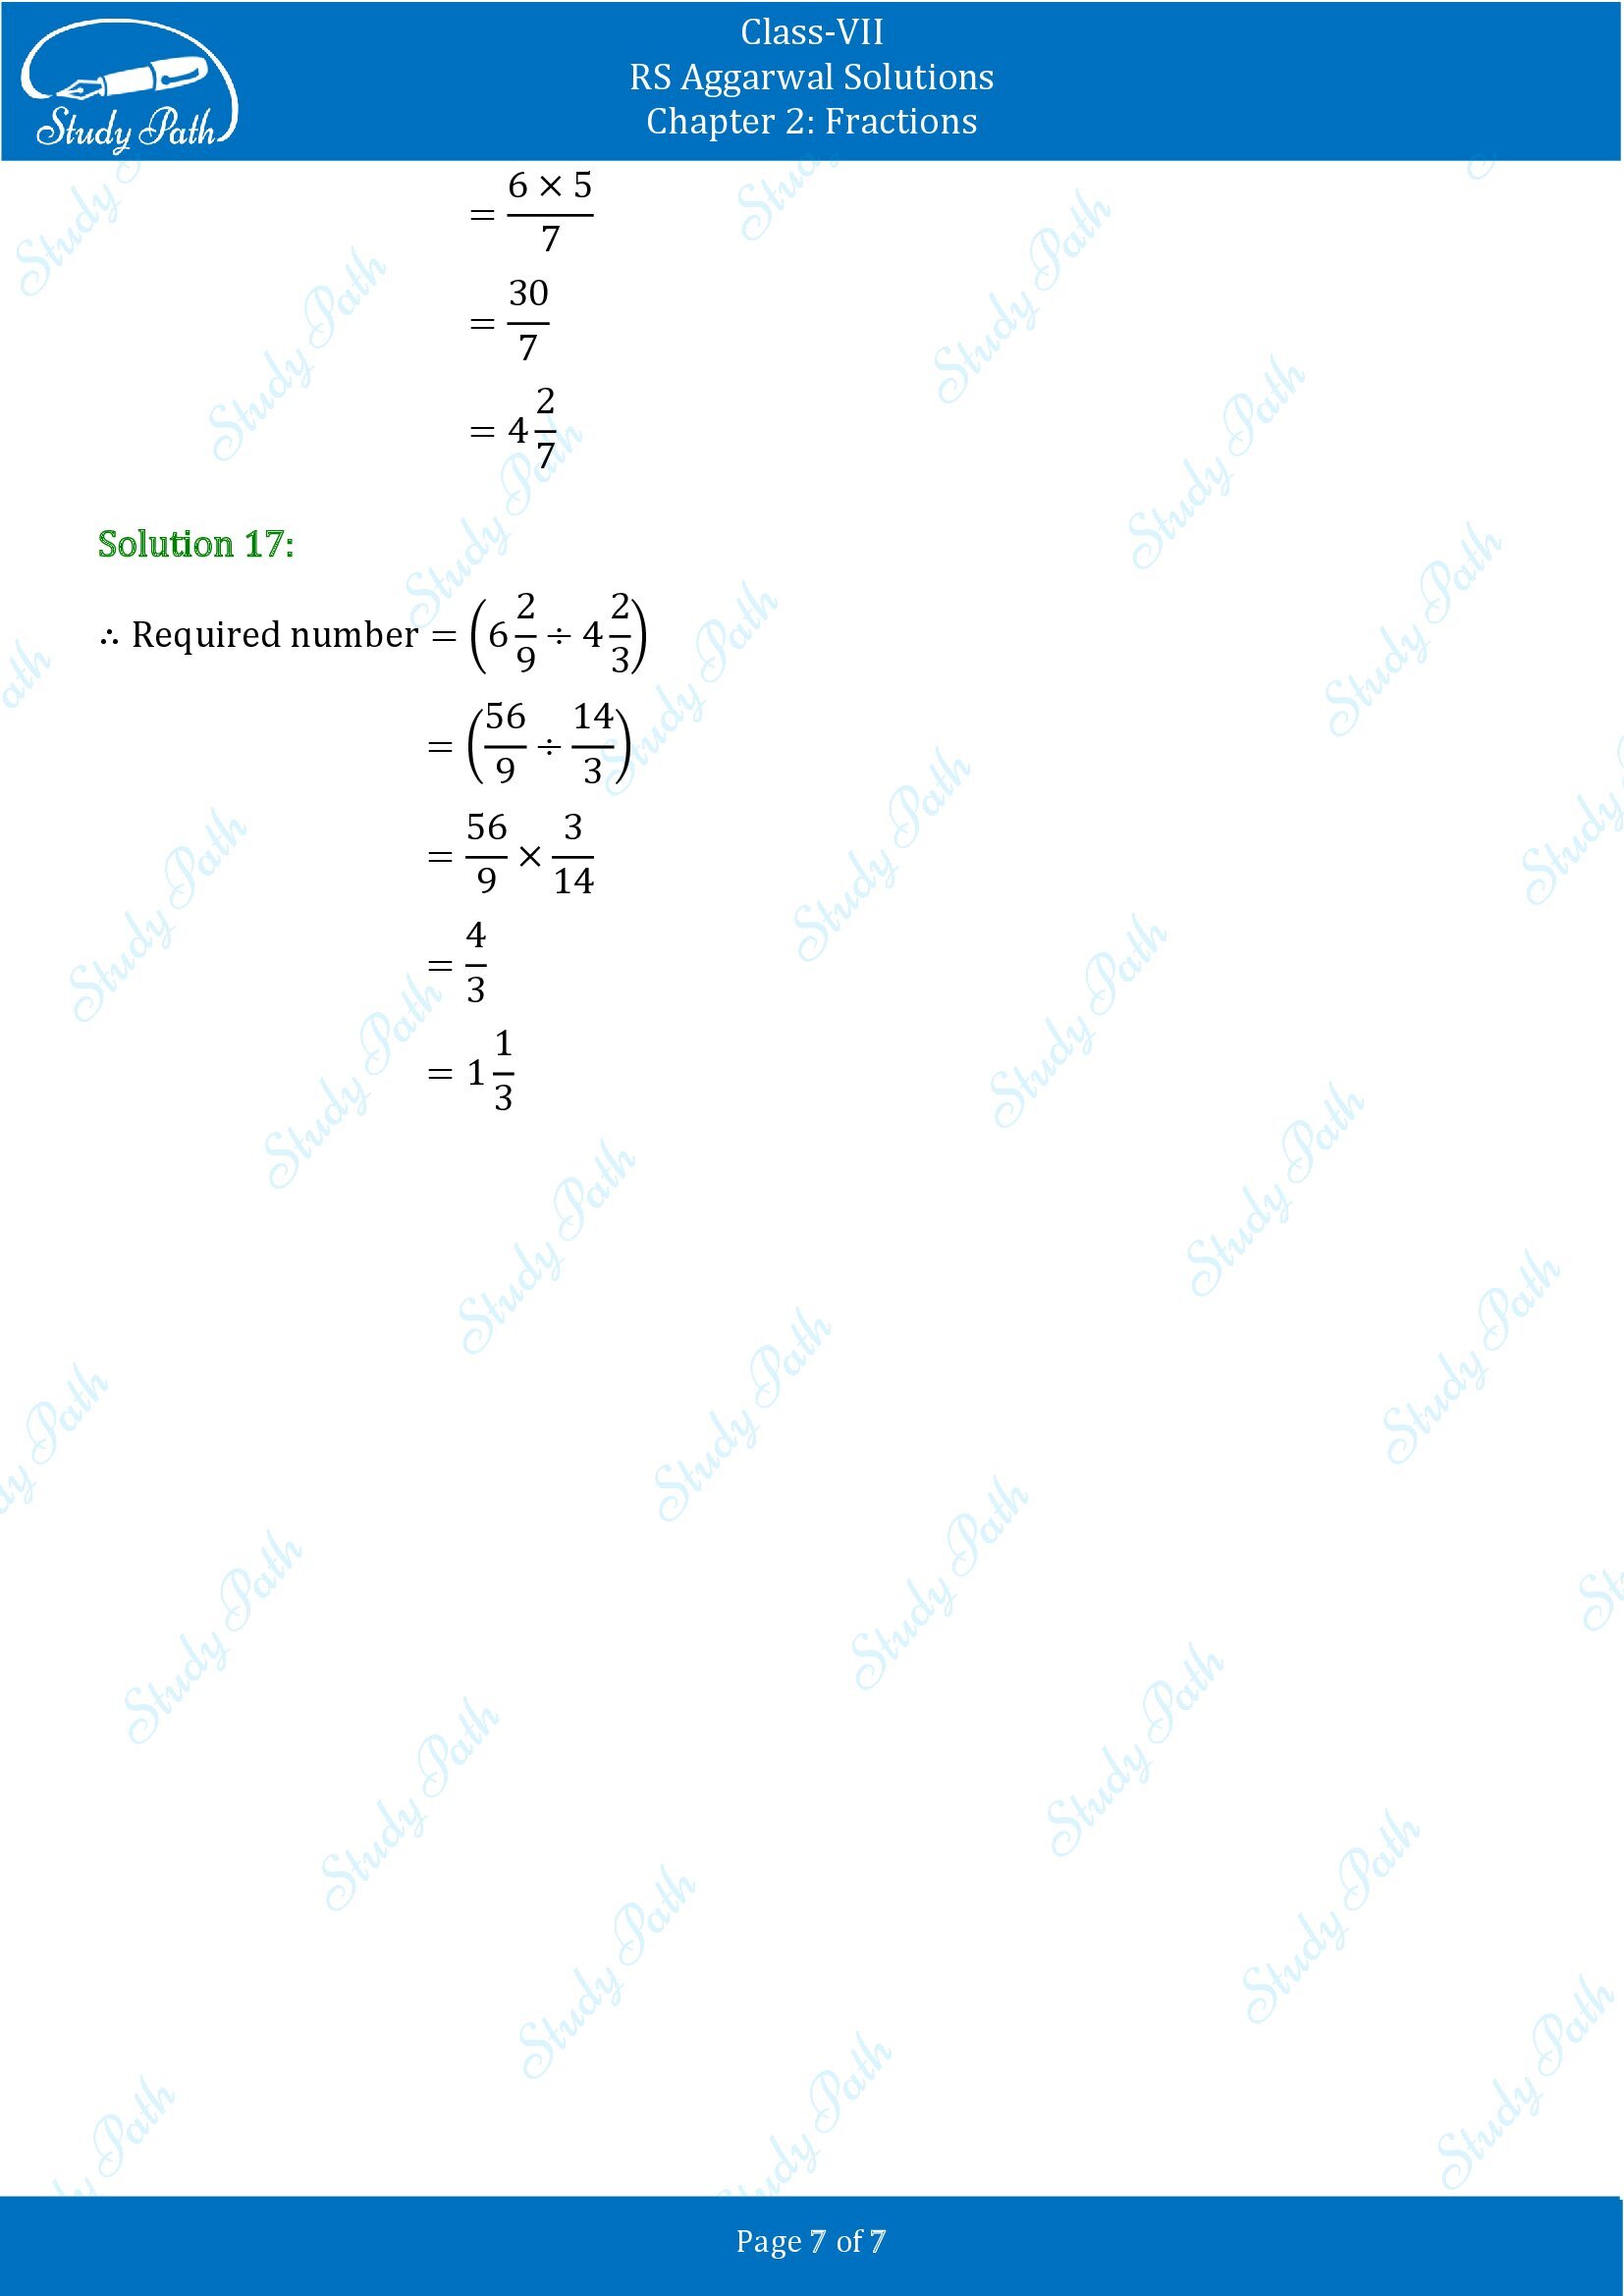 RS Aggarwal Solutions Class 7 Chapter 2 Fractions Exercise 2C 00007